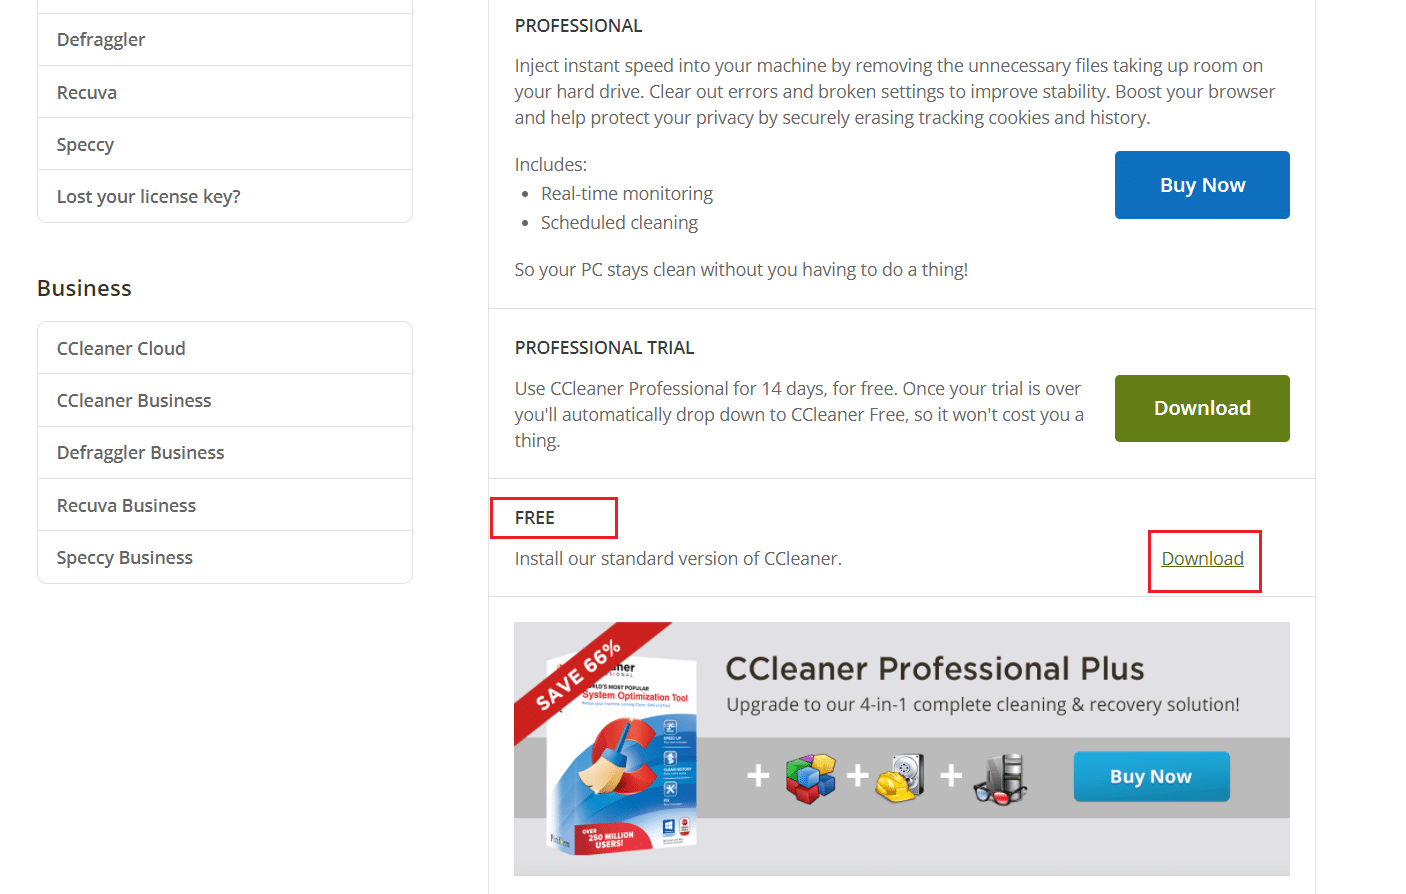 scroll down to find Free option and click on Download to download CCleaner